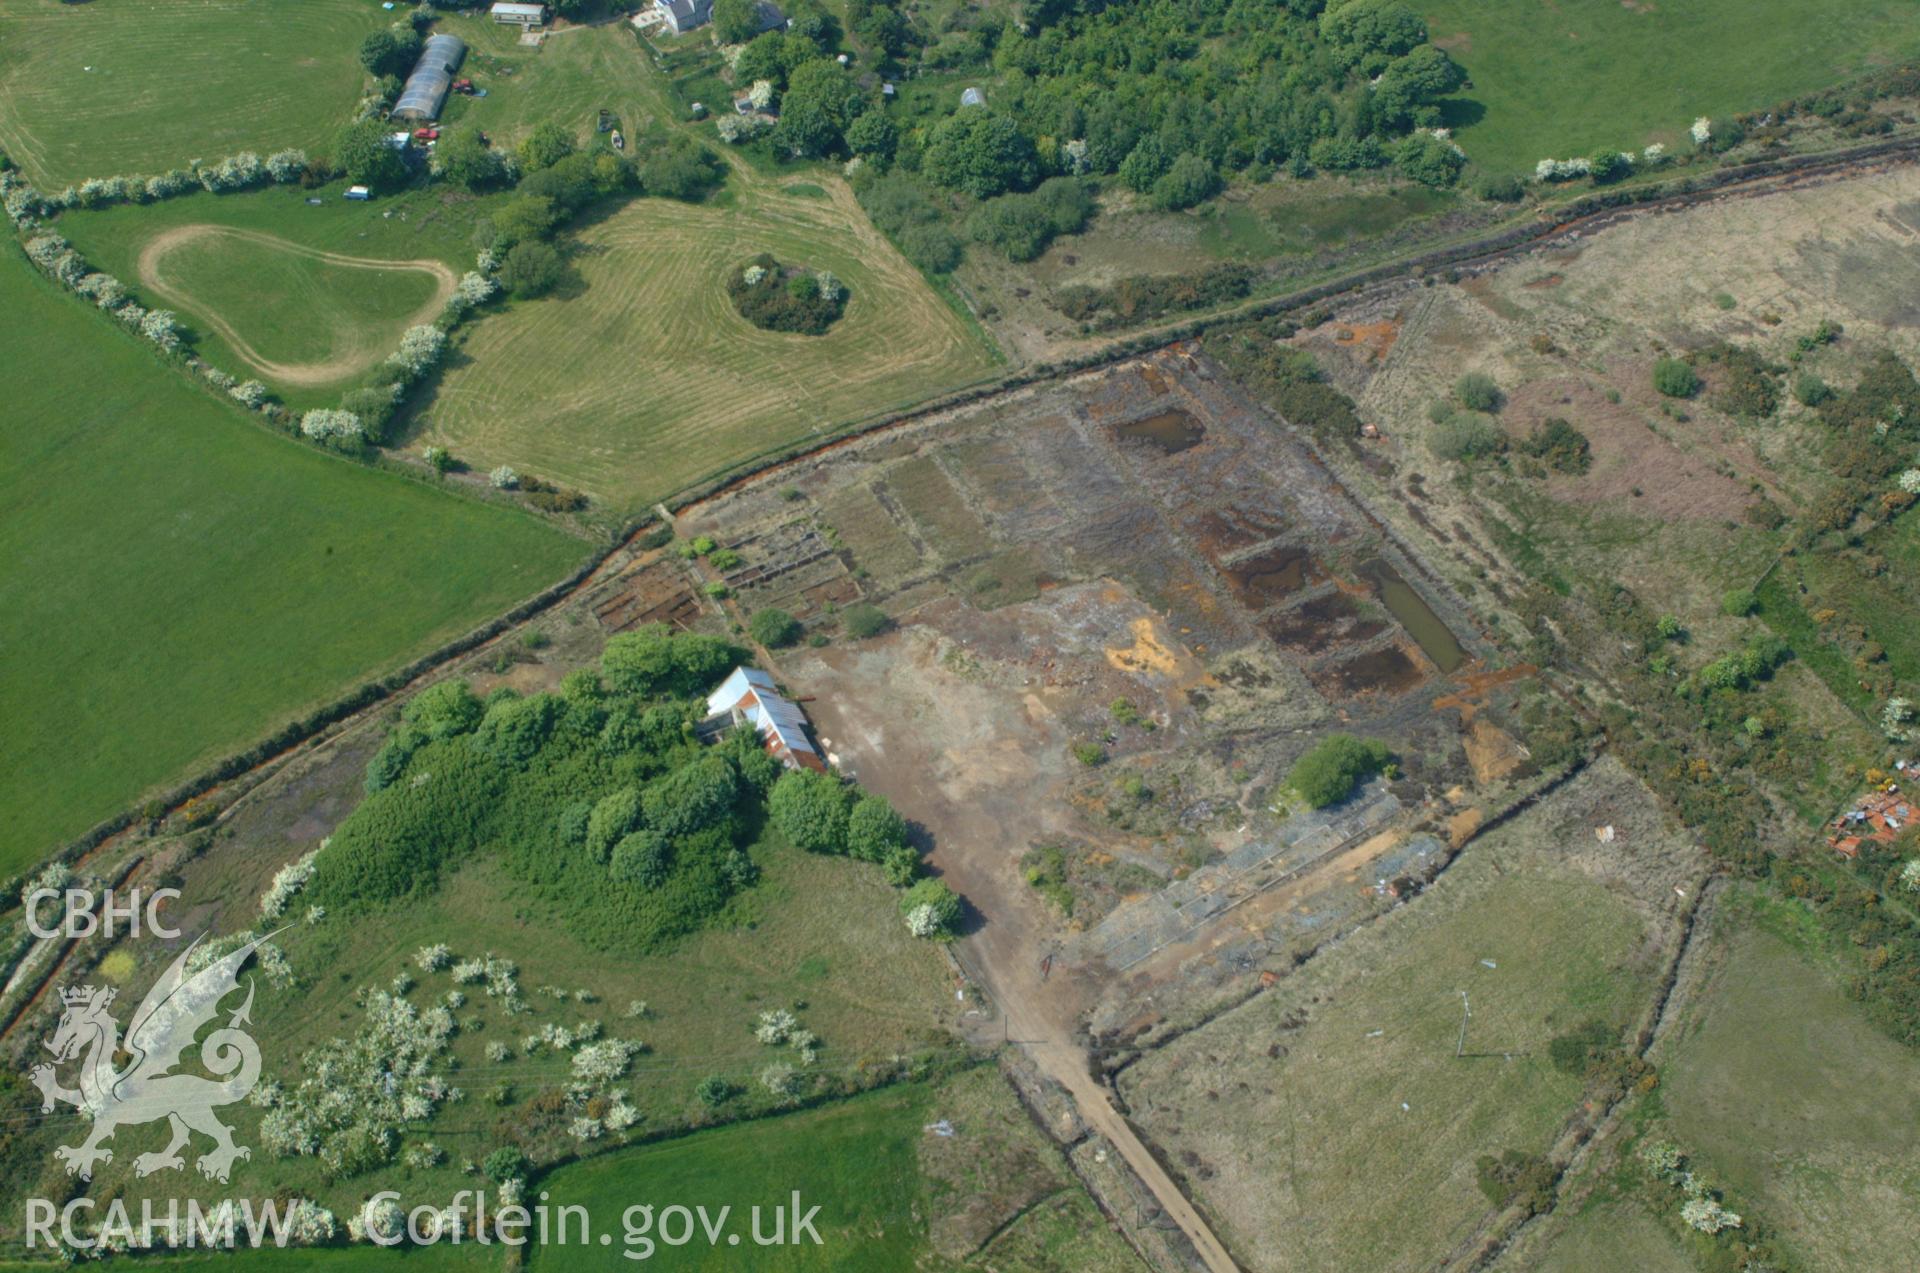 RCAHMW colour oblique aerial photograph of Dyffryn Adda Reverbatory Furnace, Parys Mountain taken on 26/05/2004 by Toby Driver